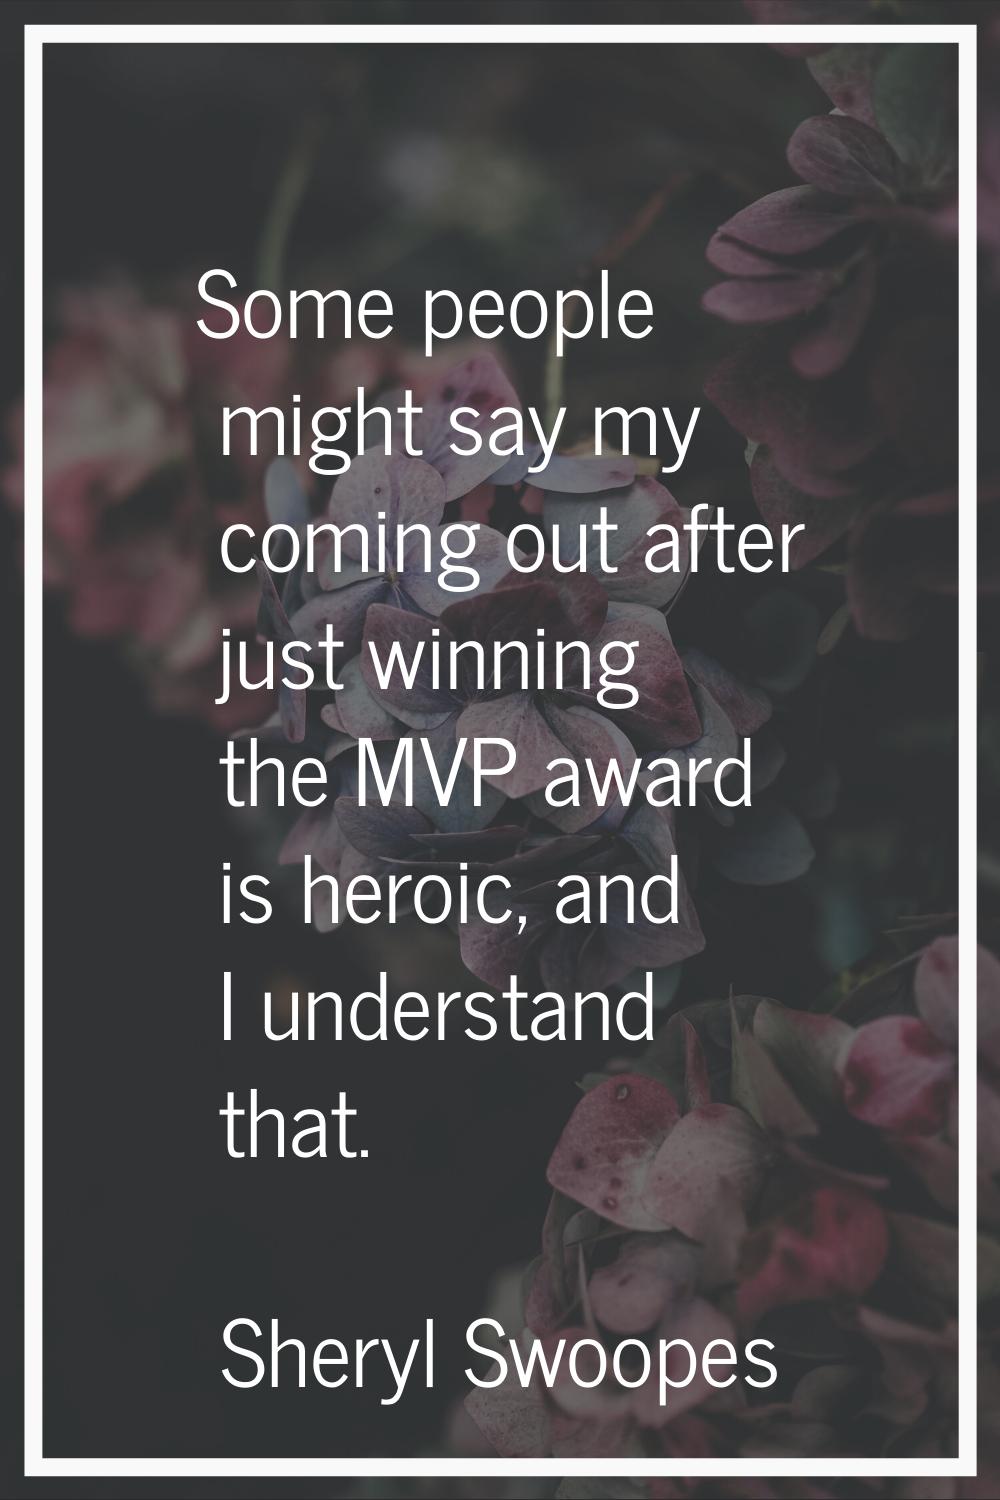 Some people might say my coming out after just winning the MVP award is heroic, and I understand th